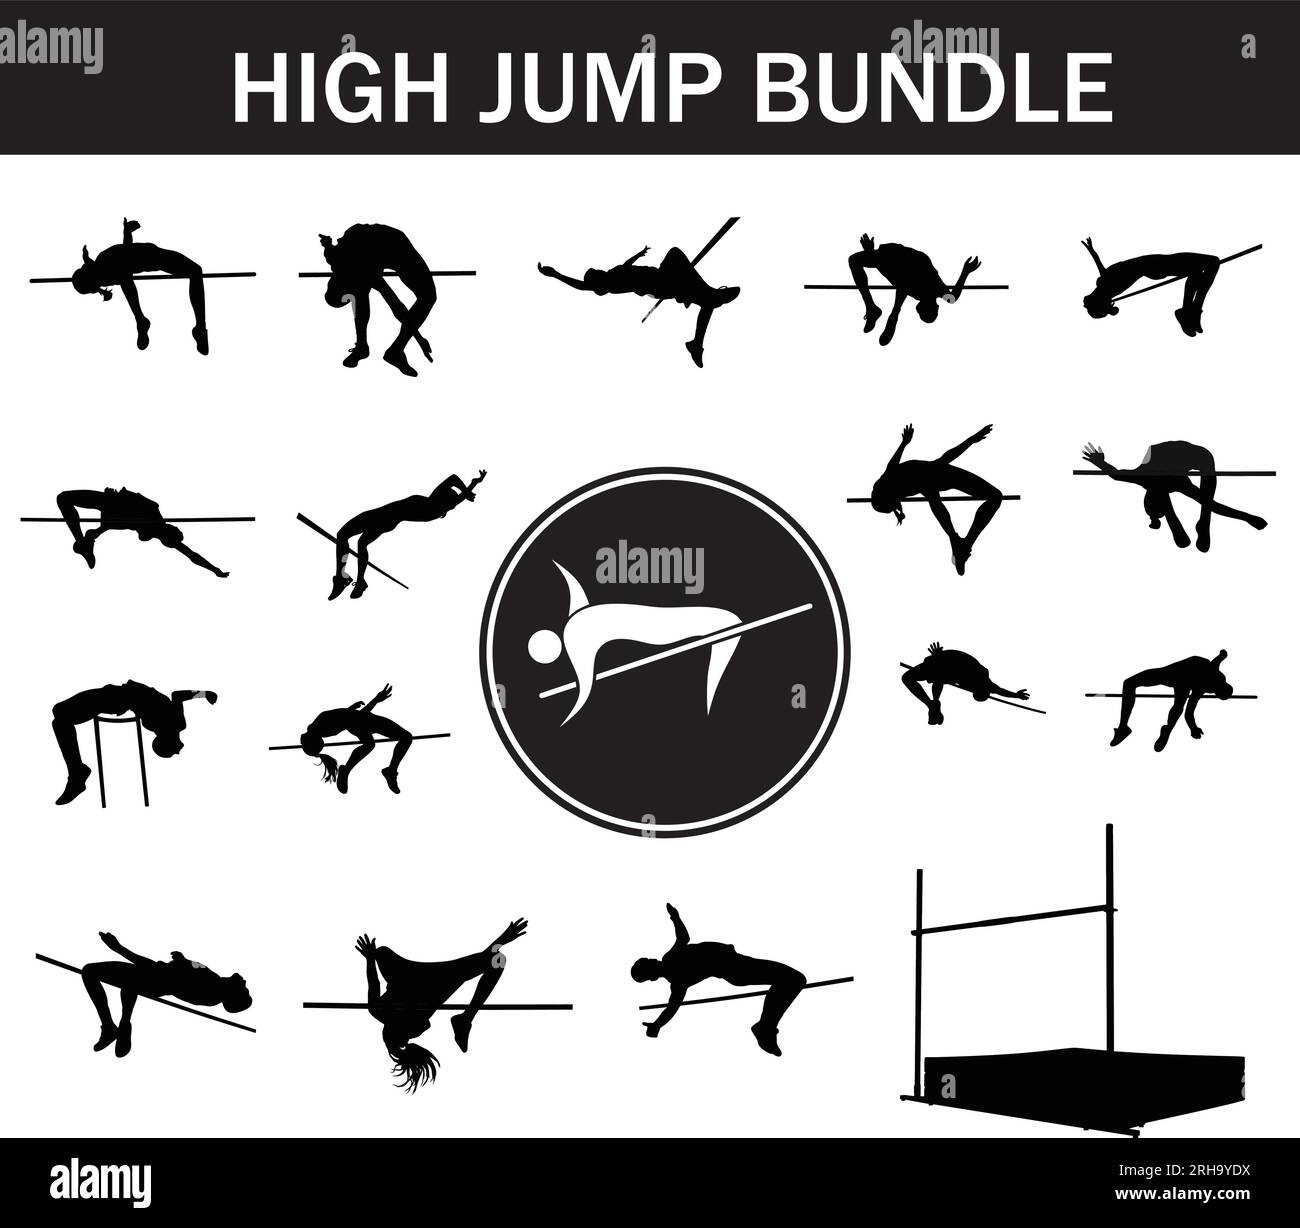 High Jump Silhouette Bundle | Collection of High Jump Players with Logo ...